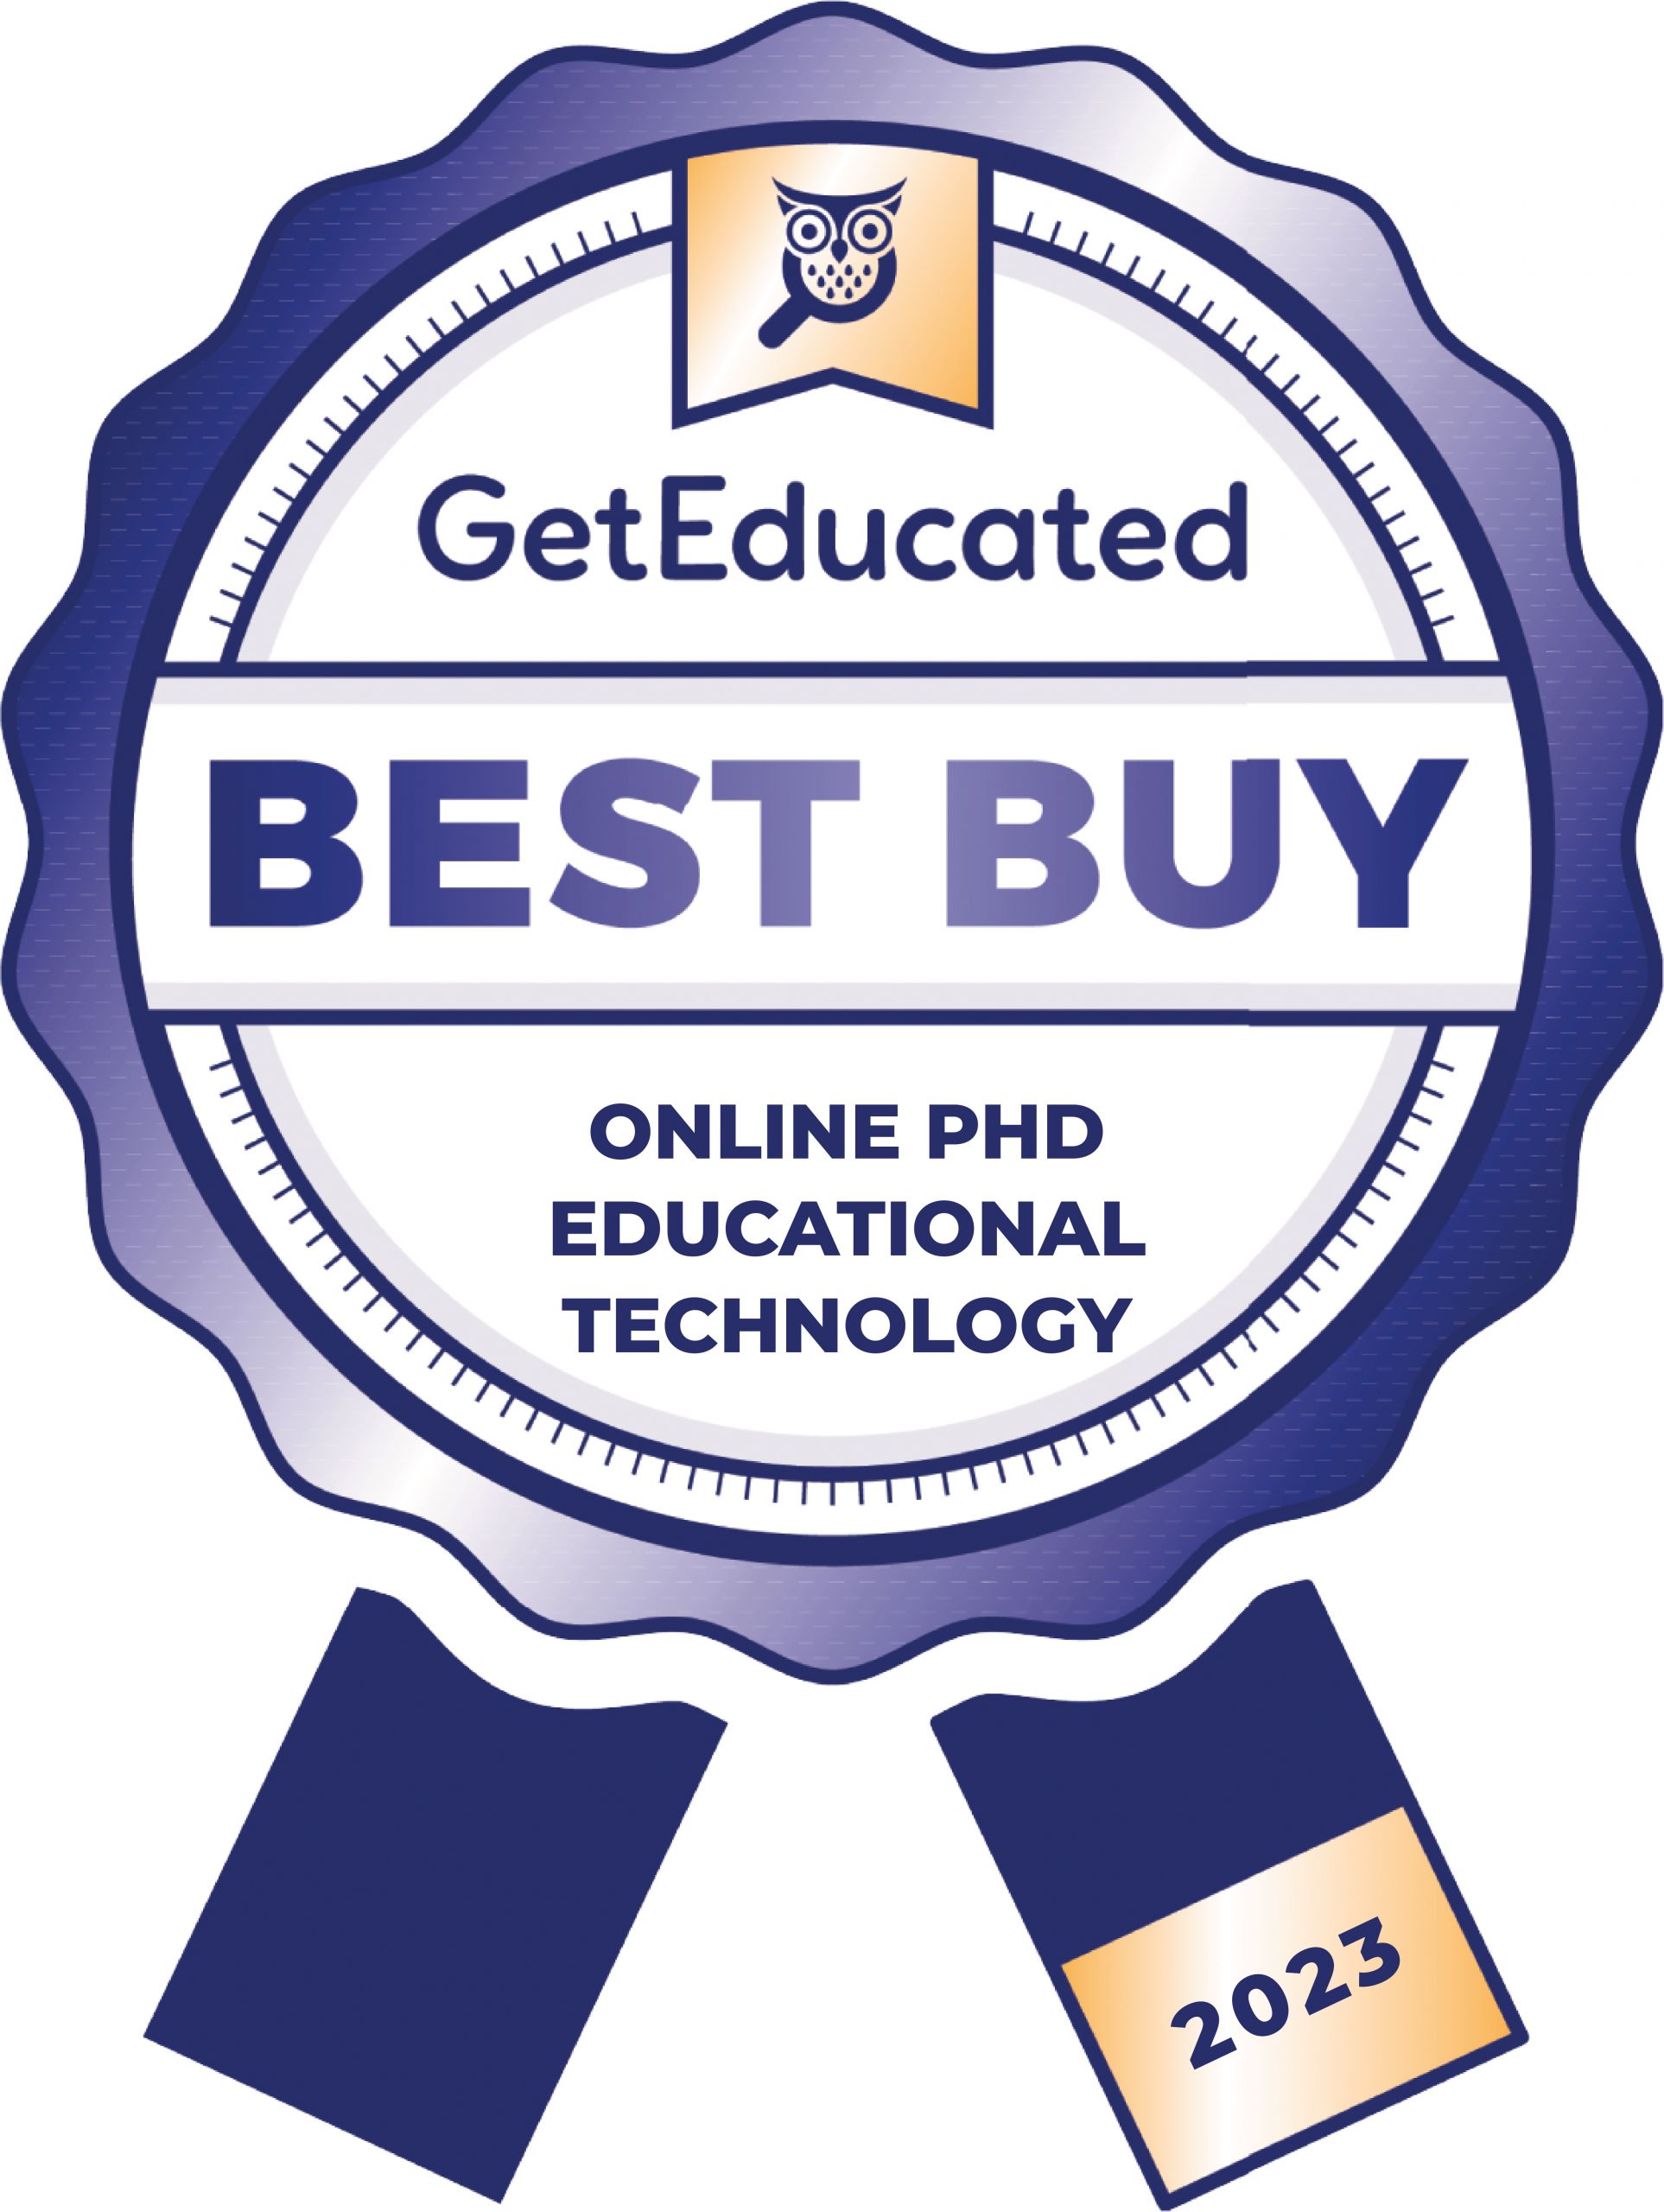 Rankings for the cheapest phd educational technology online